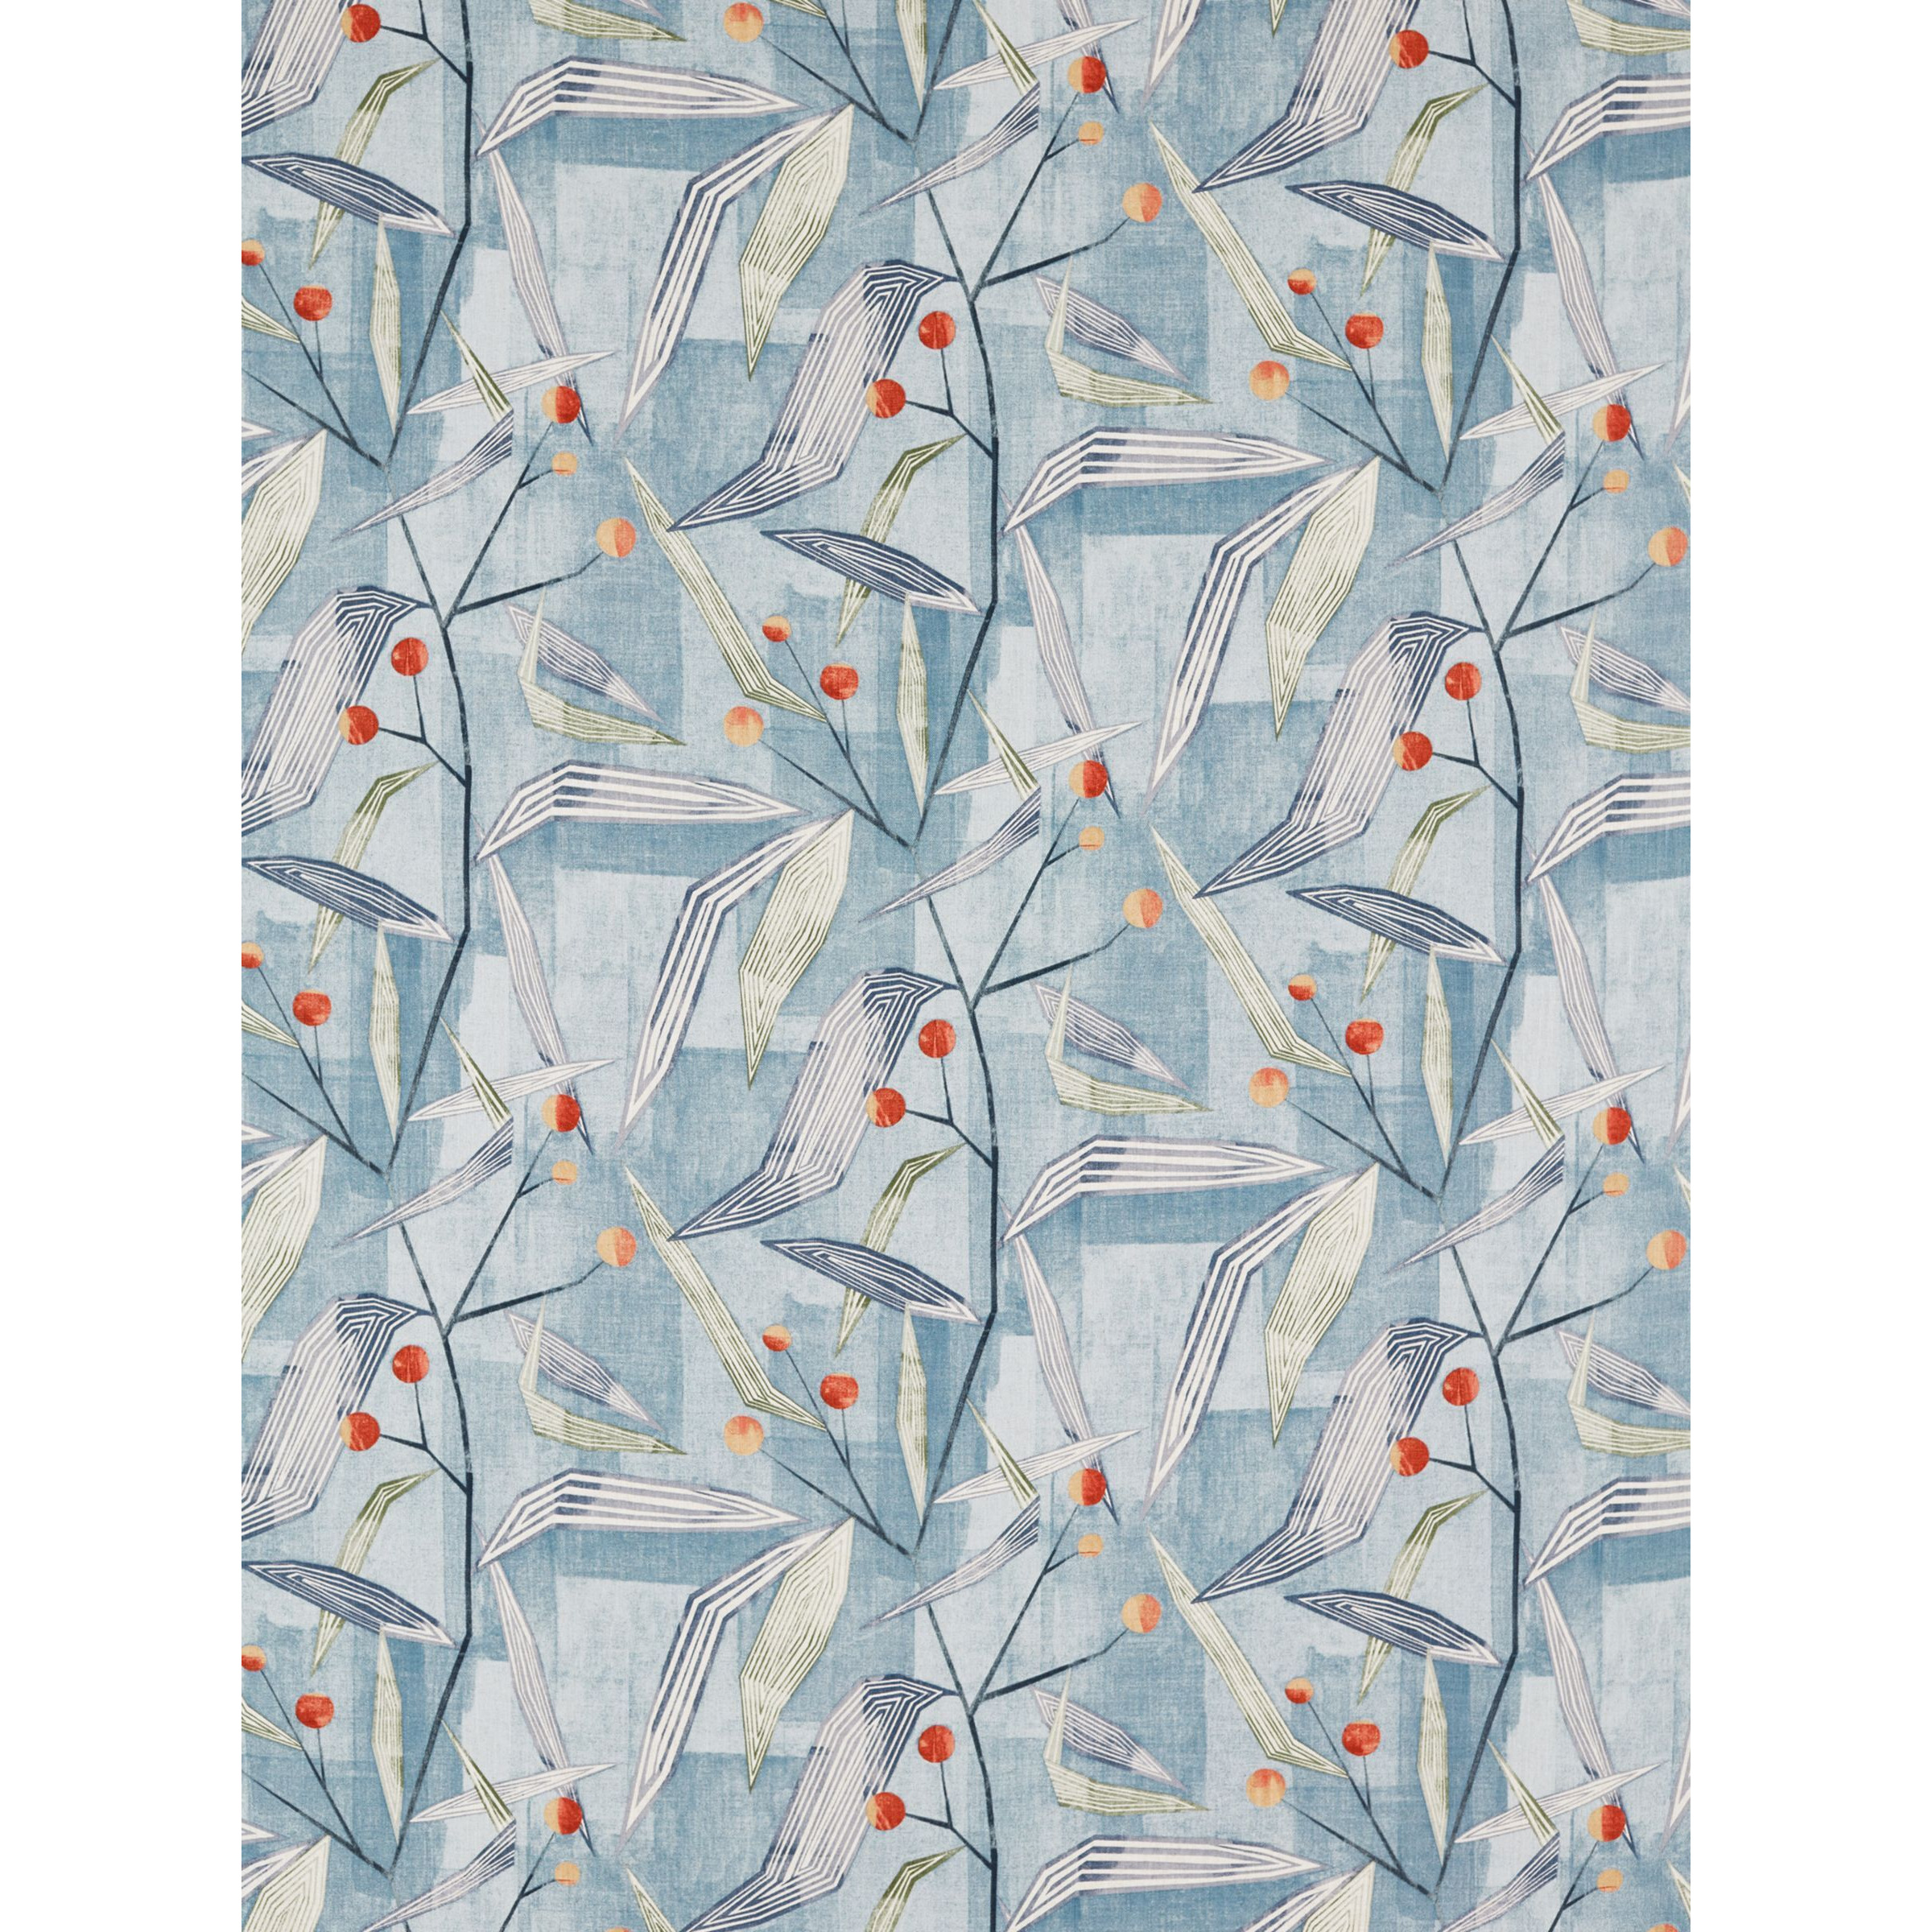 Harlequin Entity Made to Measure Curtains or Roman Blind, Brick/Denim - image 1